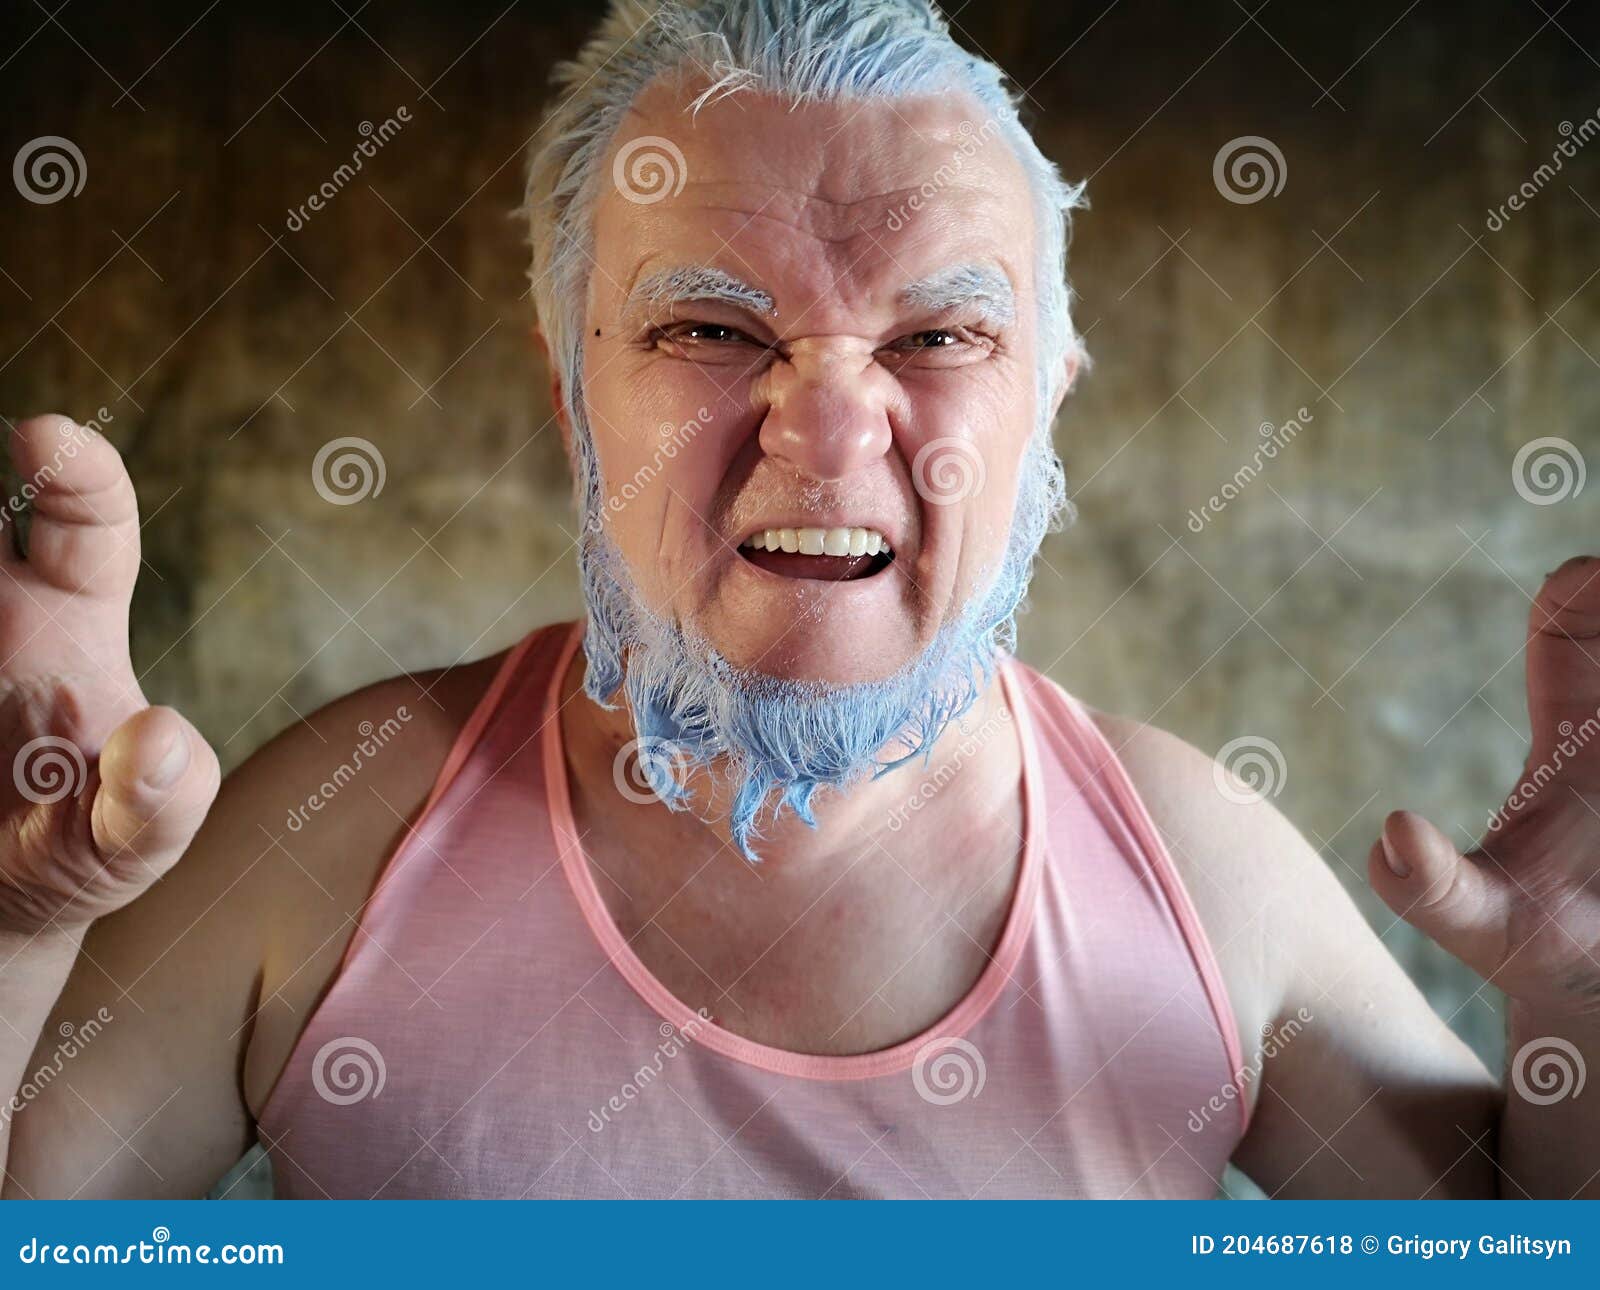 Man with blue hair and beard - wide 7